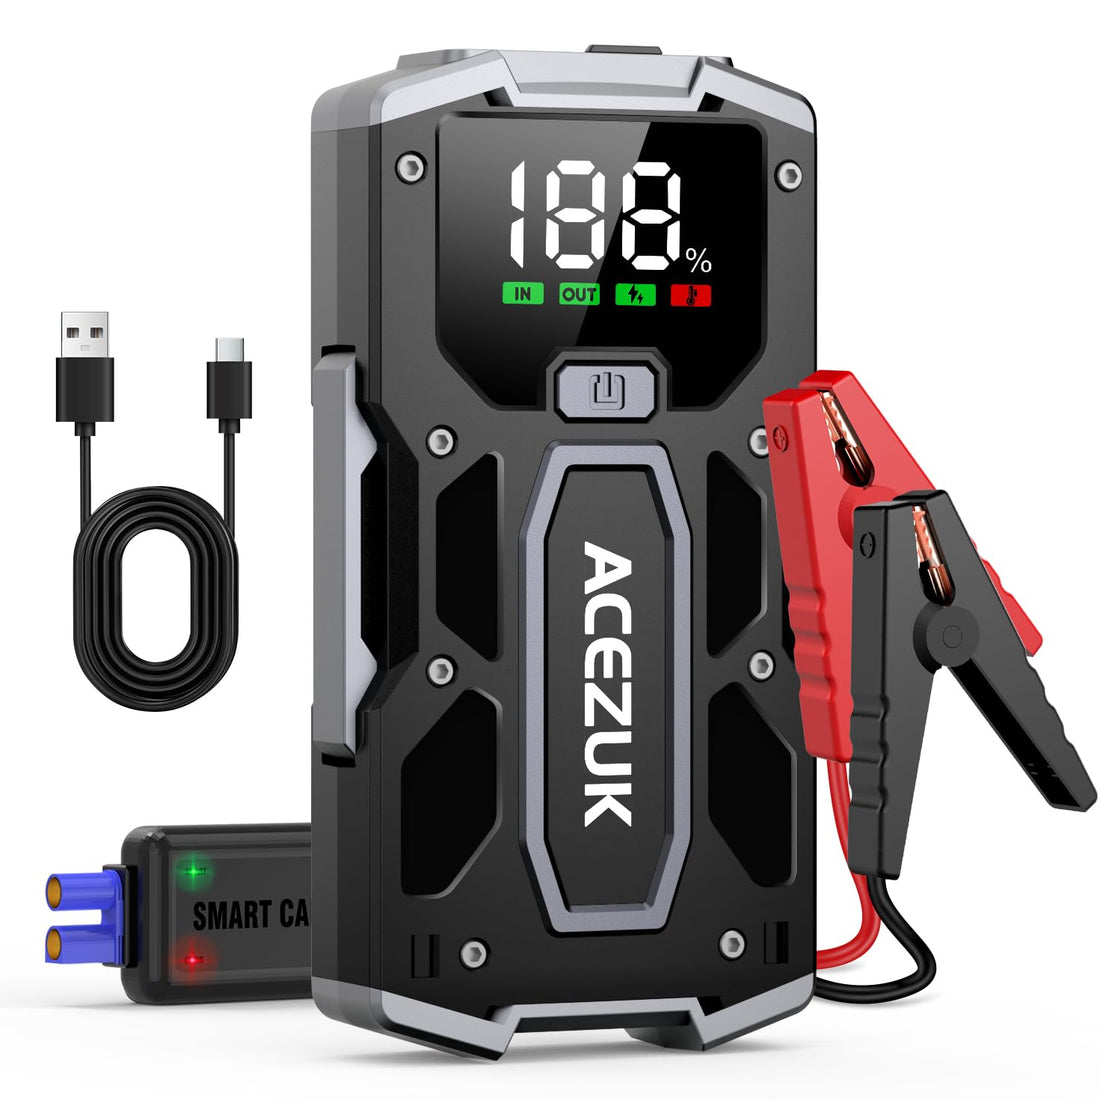 ACEZUK Car Jump Starter, 3000A 12V 8-in-1 Jump Starter Battery Pack, Up to 7.0L Gas & 5.5L Diesel Engines Quick Charge 3.0 Power Bank Jumper Cable with LED,Large Screen